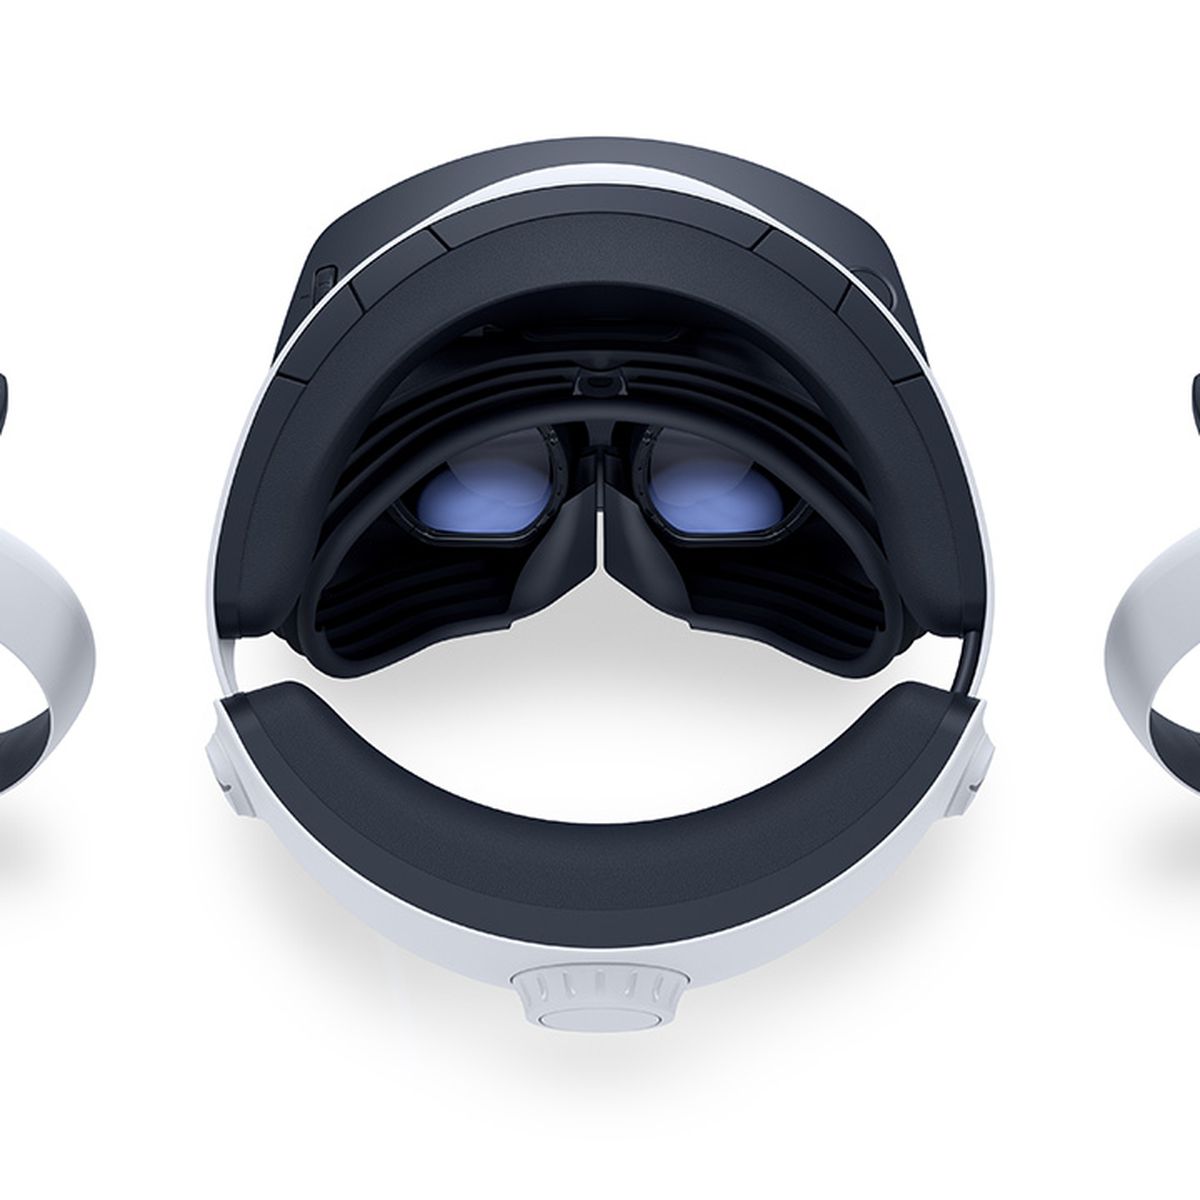 The PSVR 2 headset, as seen from above, resting on a white surface, flanked by both VR2 Sense controllers